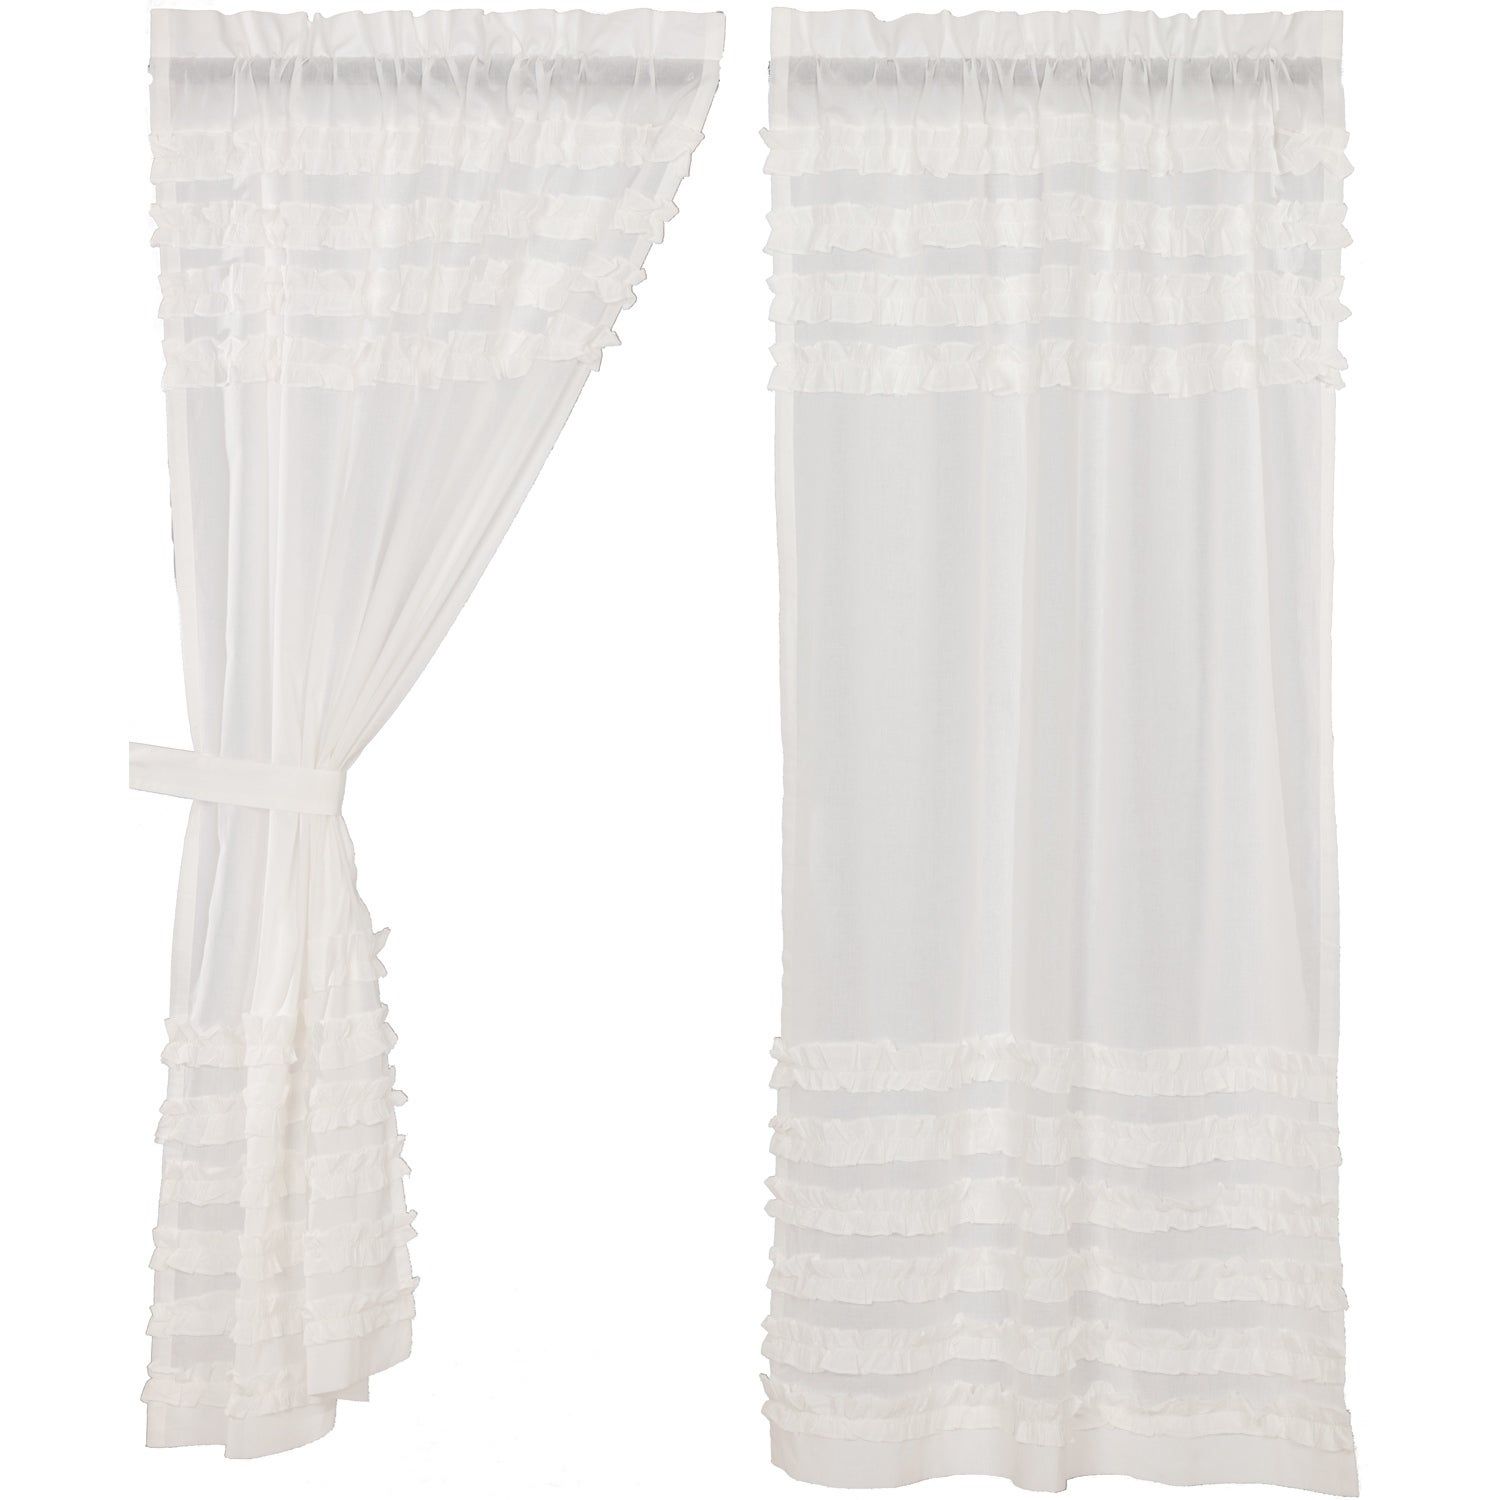 White Farmhouse Curtains Vhc White Ruffled Sheer Petticoat Panel Pair Rod  Pocket Cotton Solid Color Ruched Ruffle Sheer For White Ruffled Sheer Petticoat Tier Pairs (View 4 of 20)